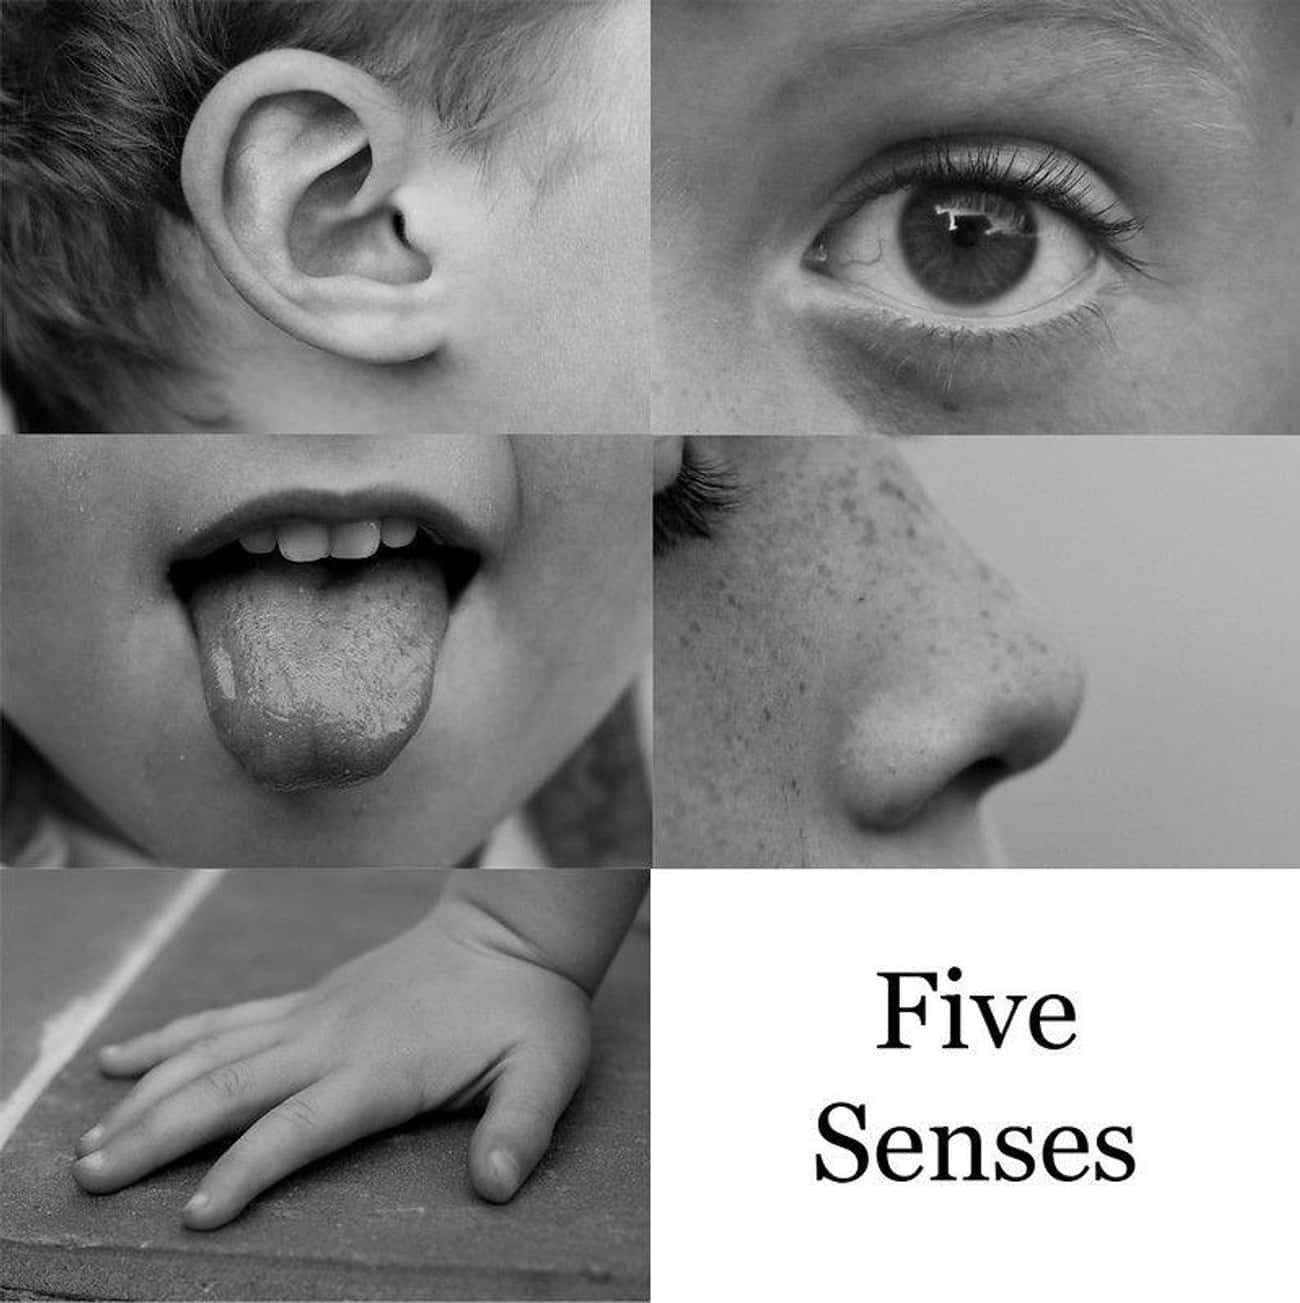 Myth: You Have Only Five Senses